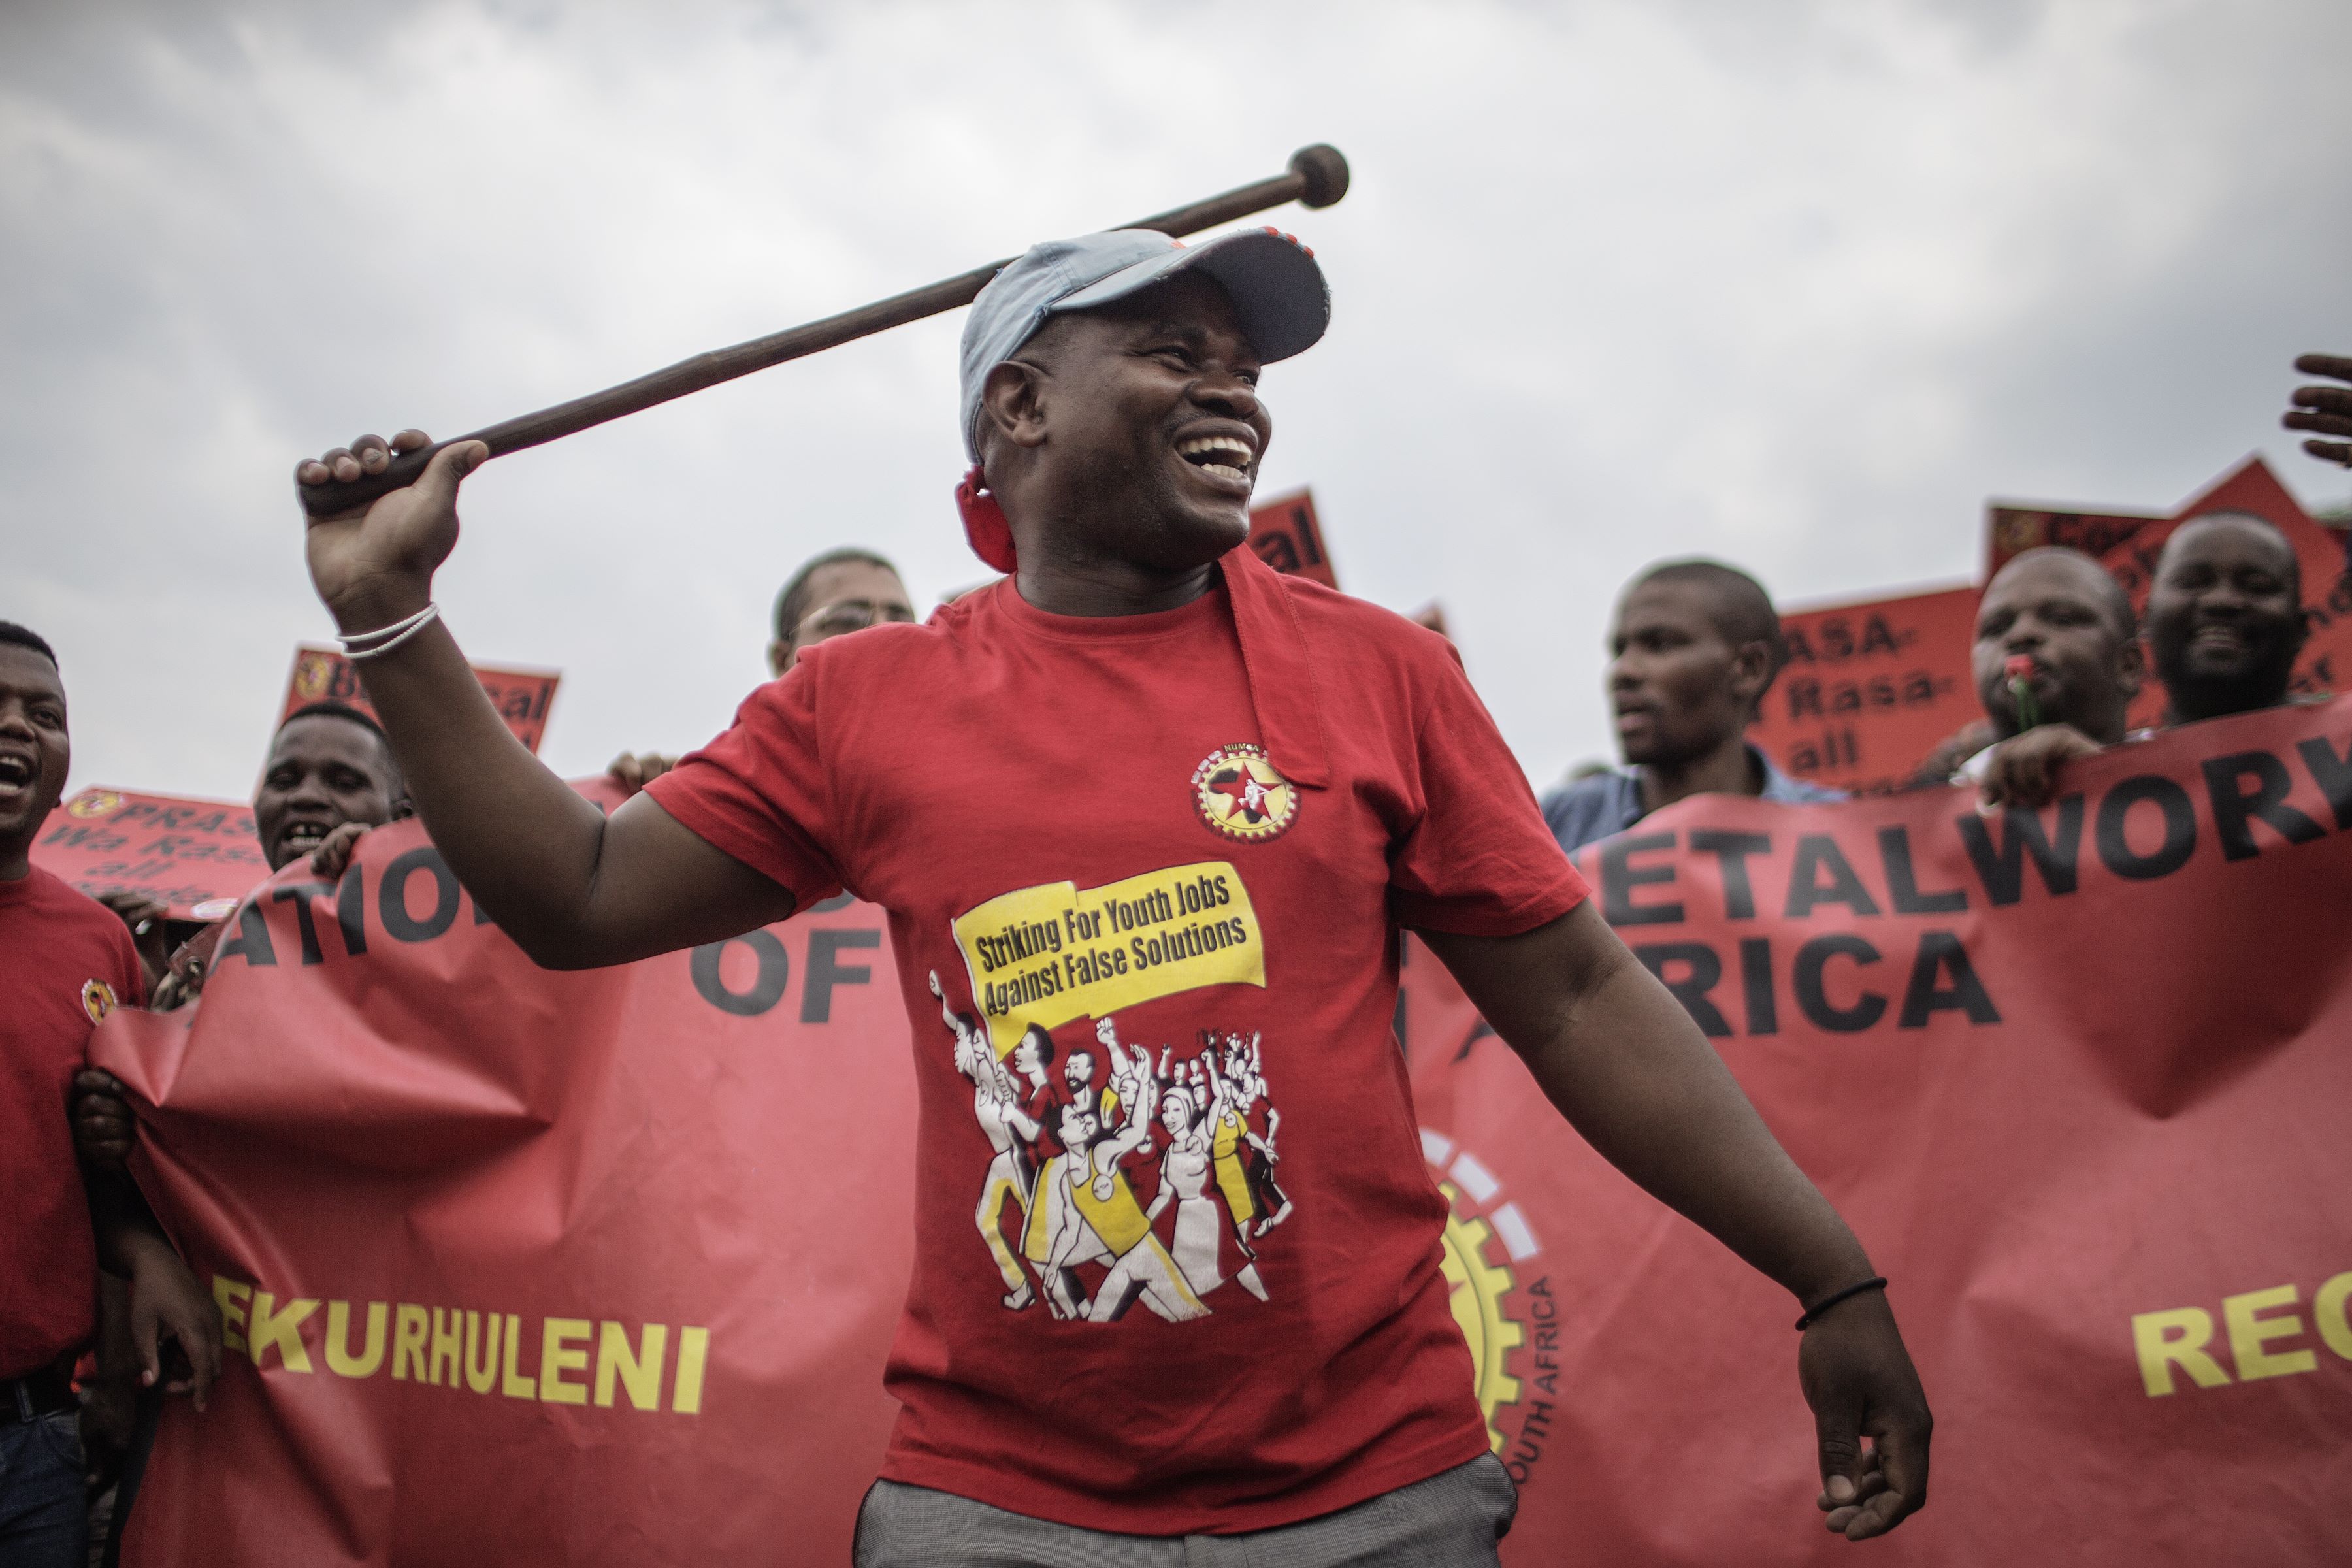 Activists from various civil society groups and trade unions march through the streets of Johannesburg, South Africa, against endemic corruption. Photo: AFP